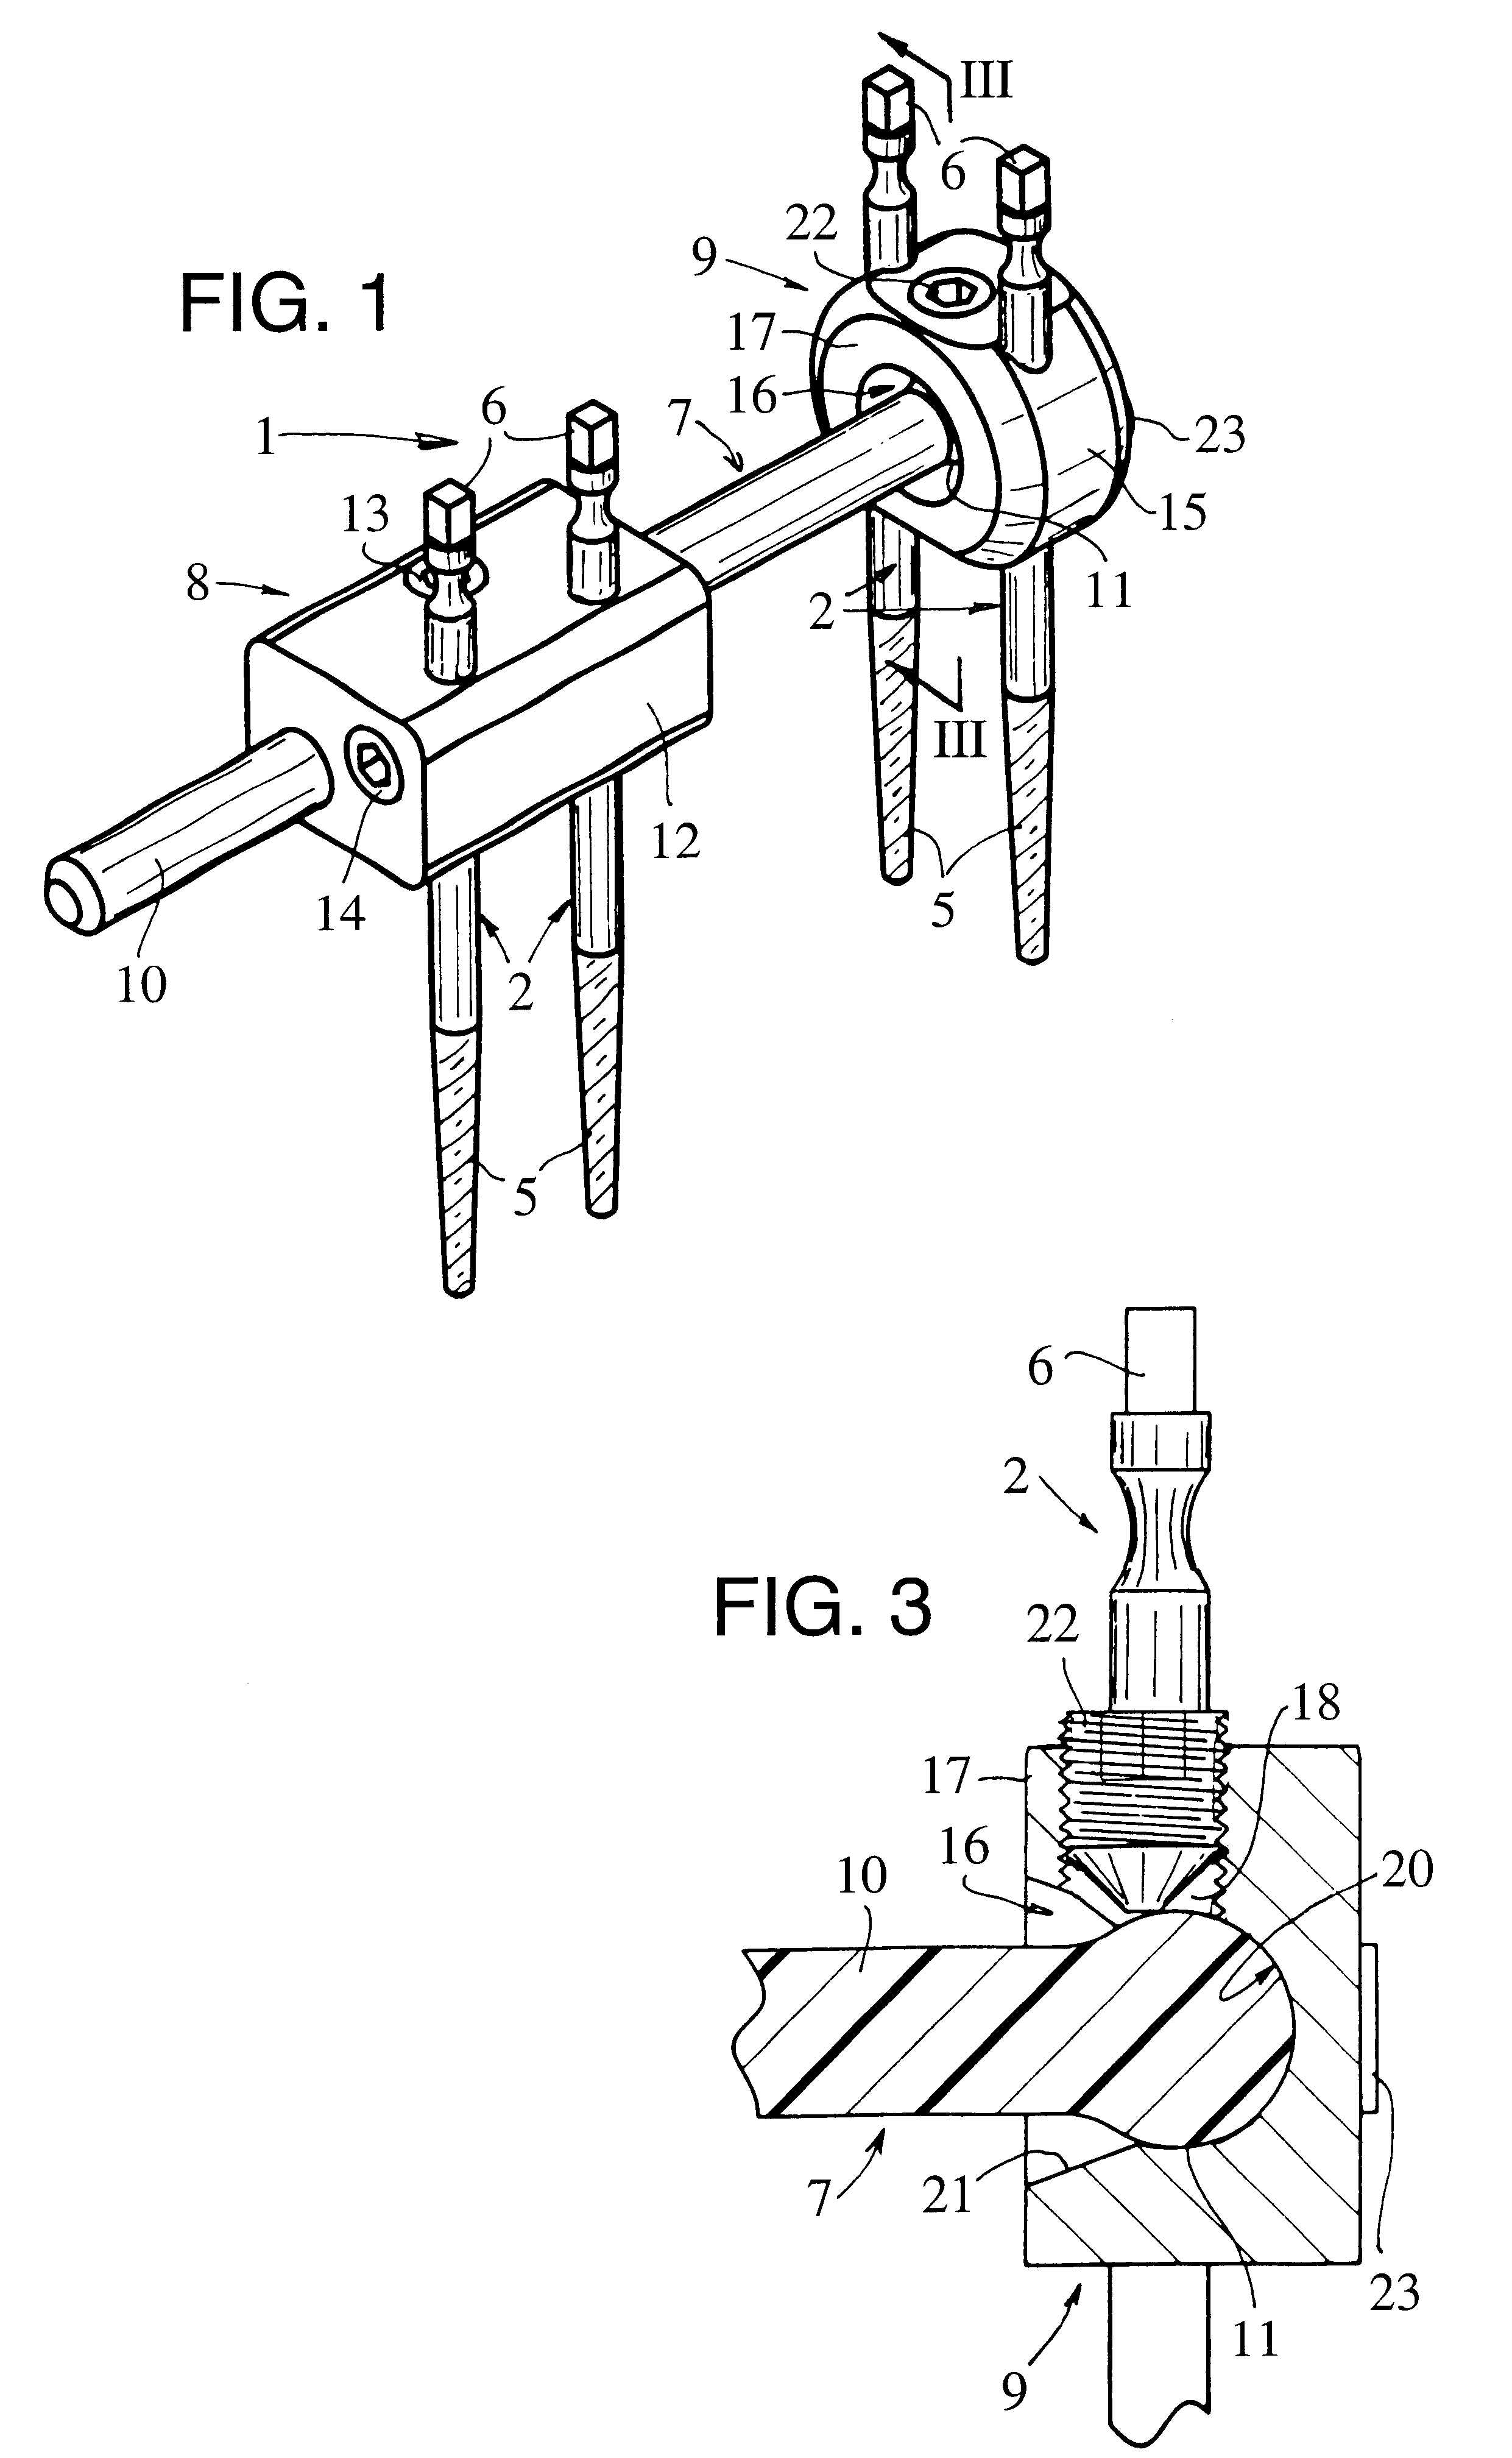 External fixator for immobilizing bone fragments, particularly in the area of the wrist